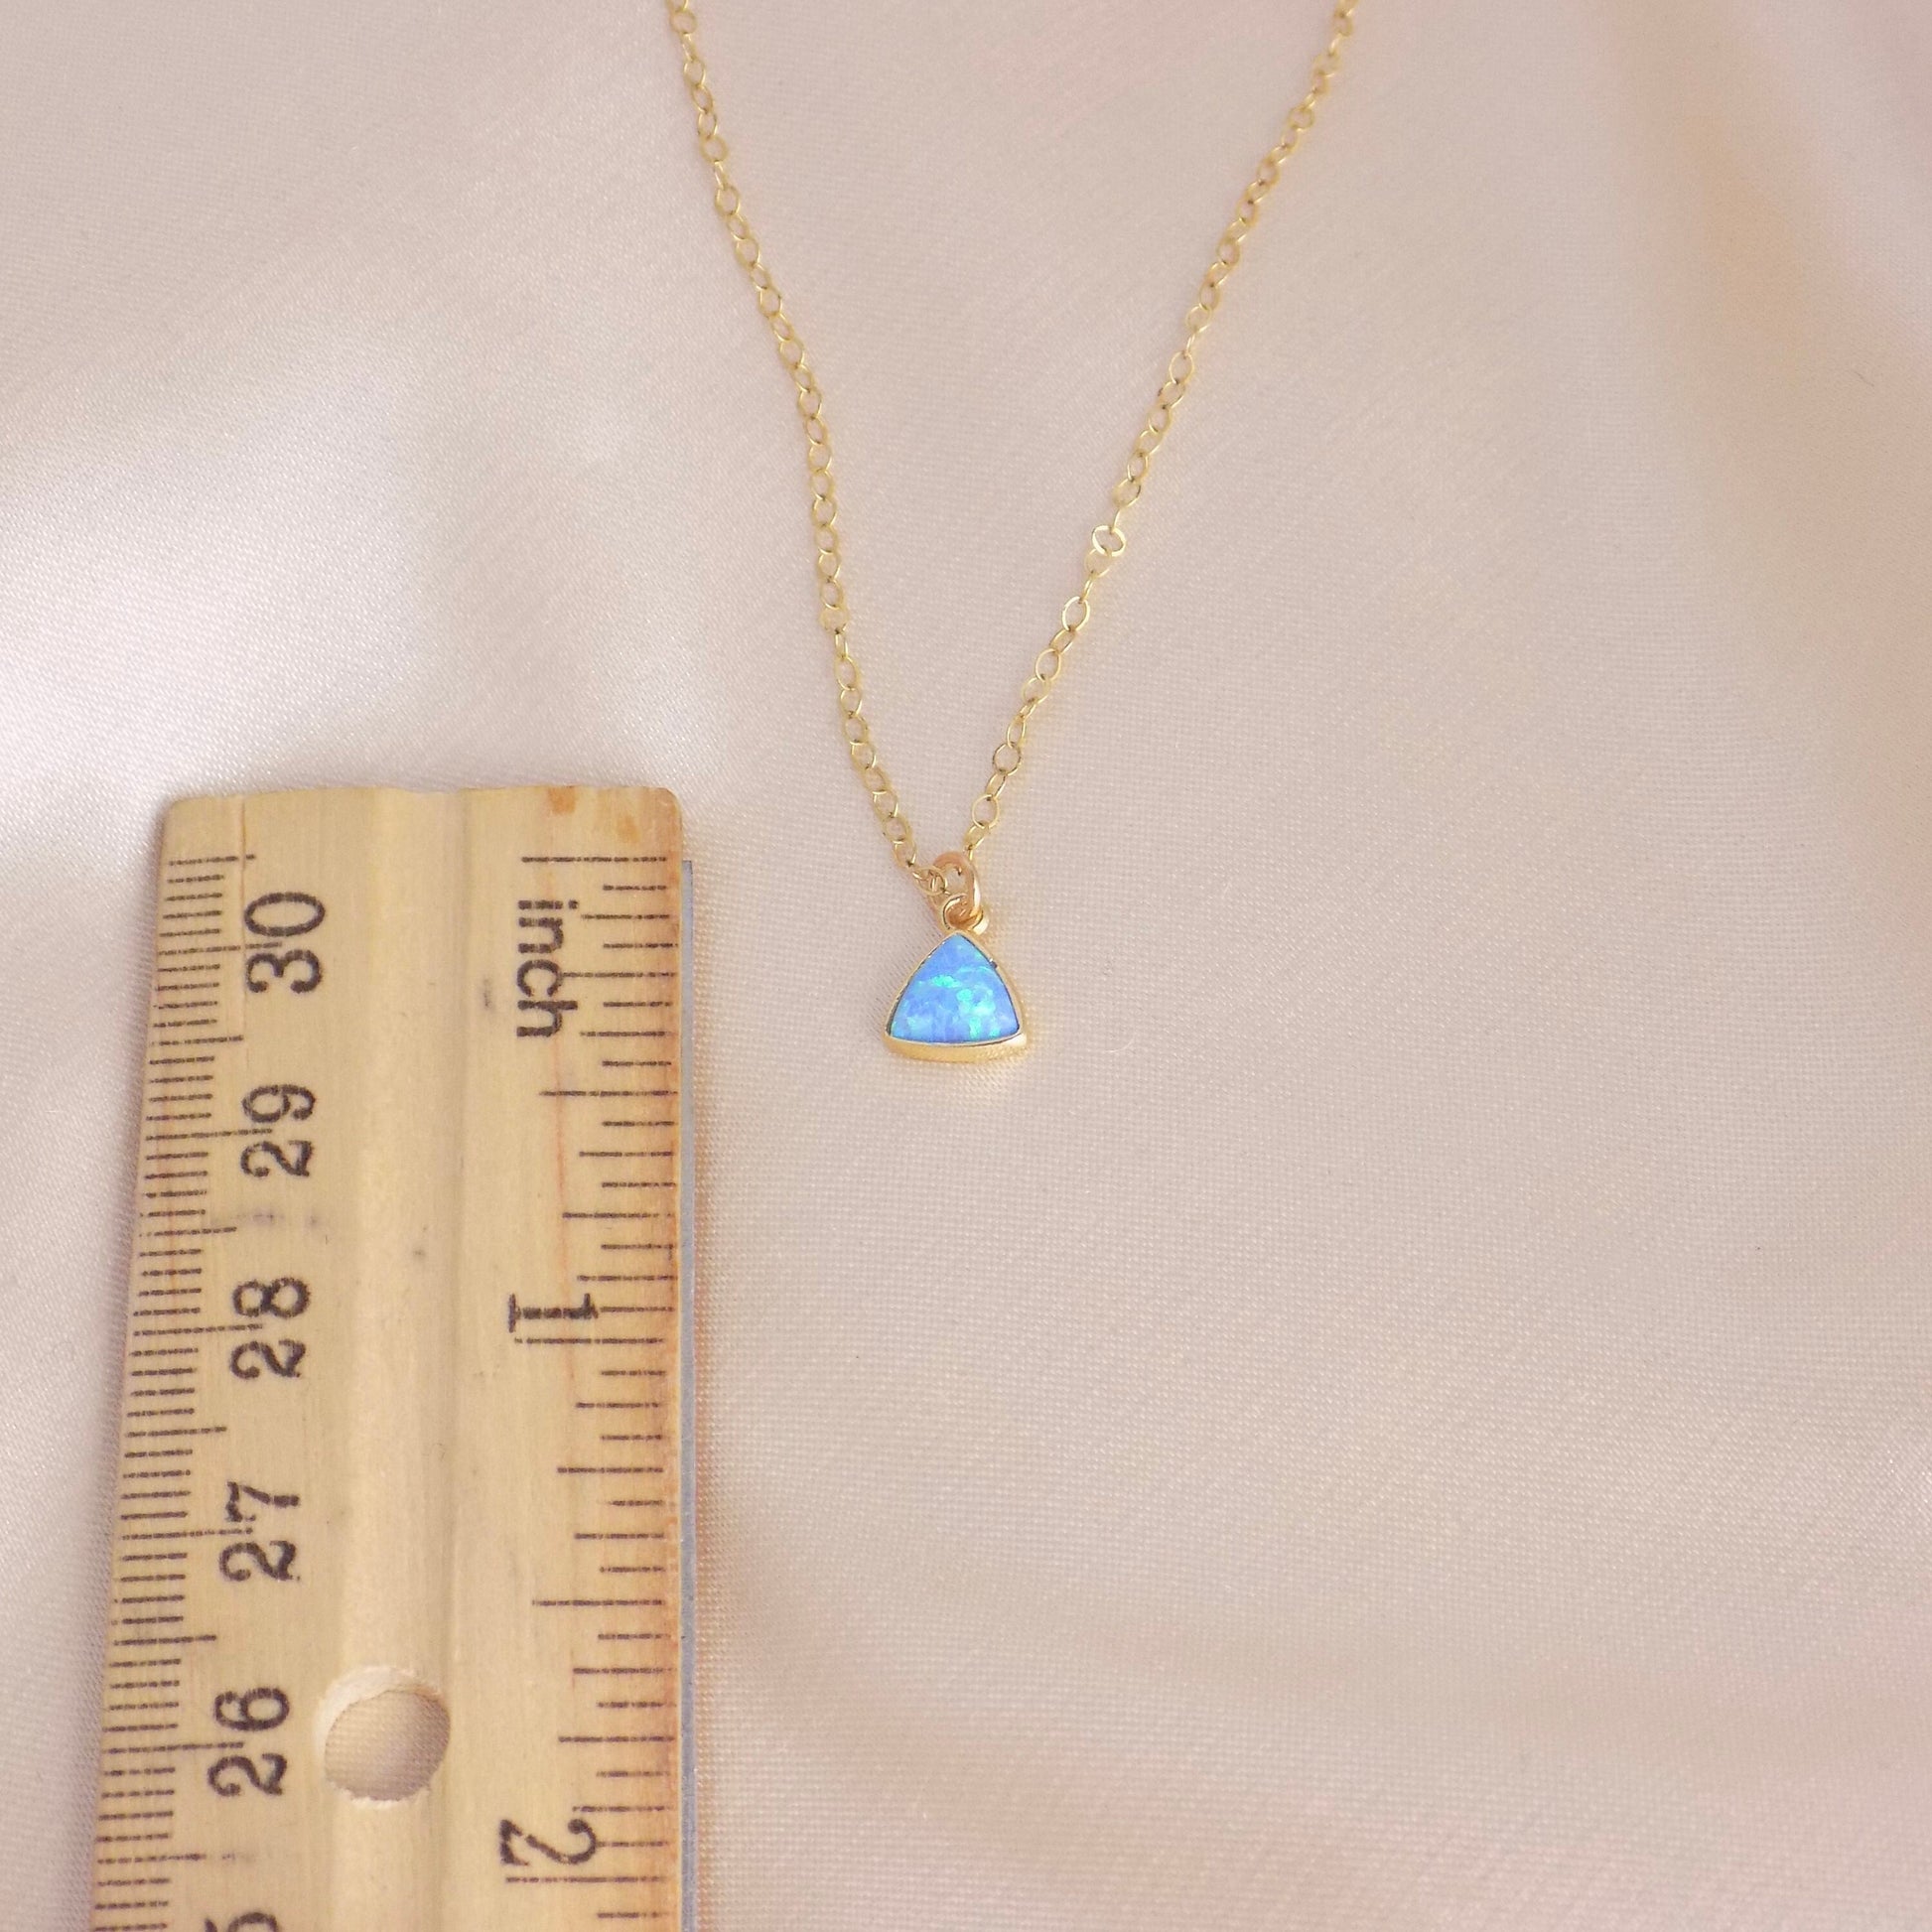 Tiny Opal Necklace Gold, Triangle Opal Necklace, Blue Opal Charm For Layering, 14K Gold Fill Chain, October Birthday Gift, M6-616